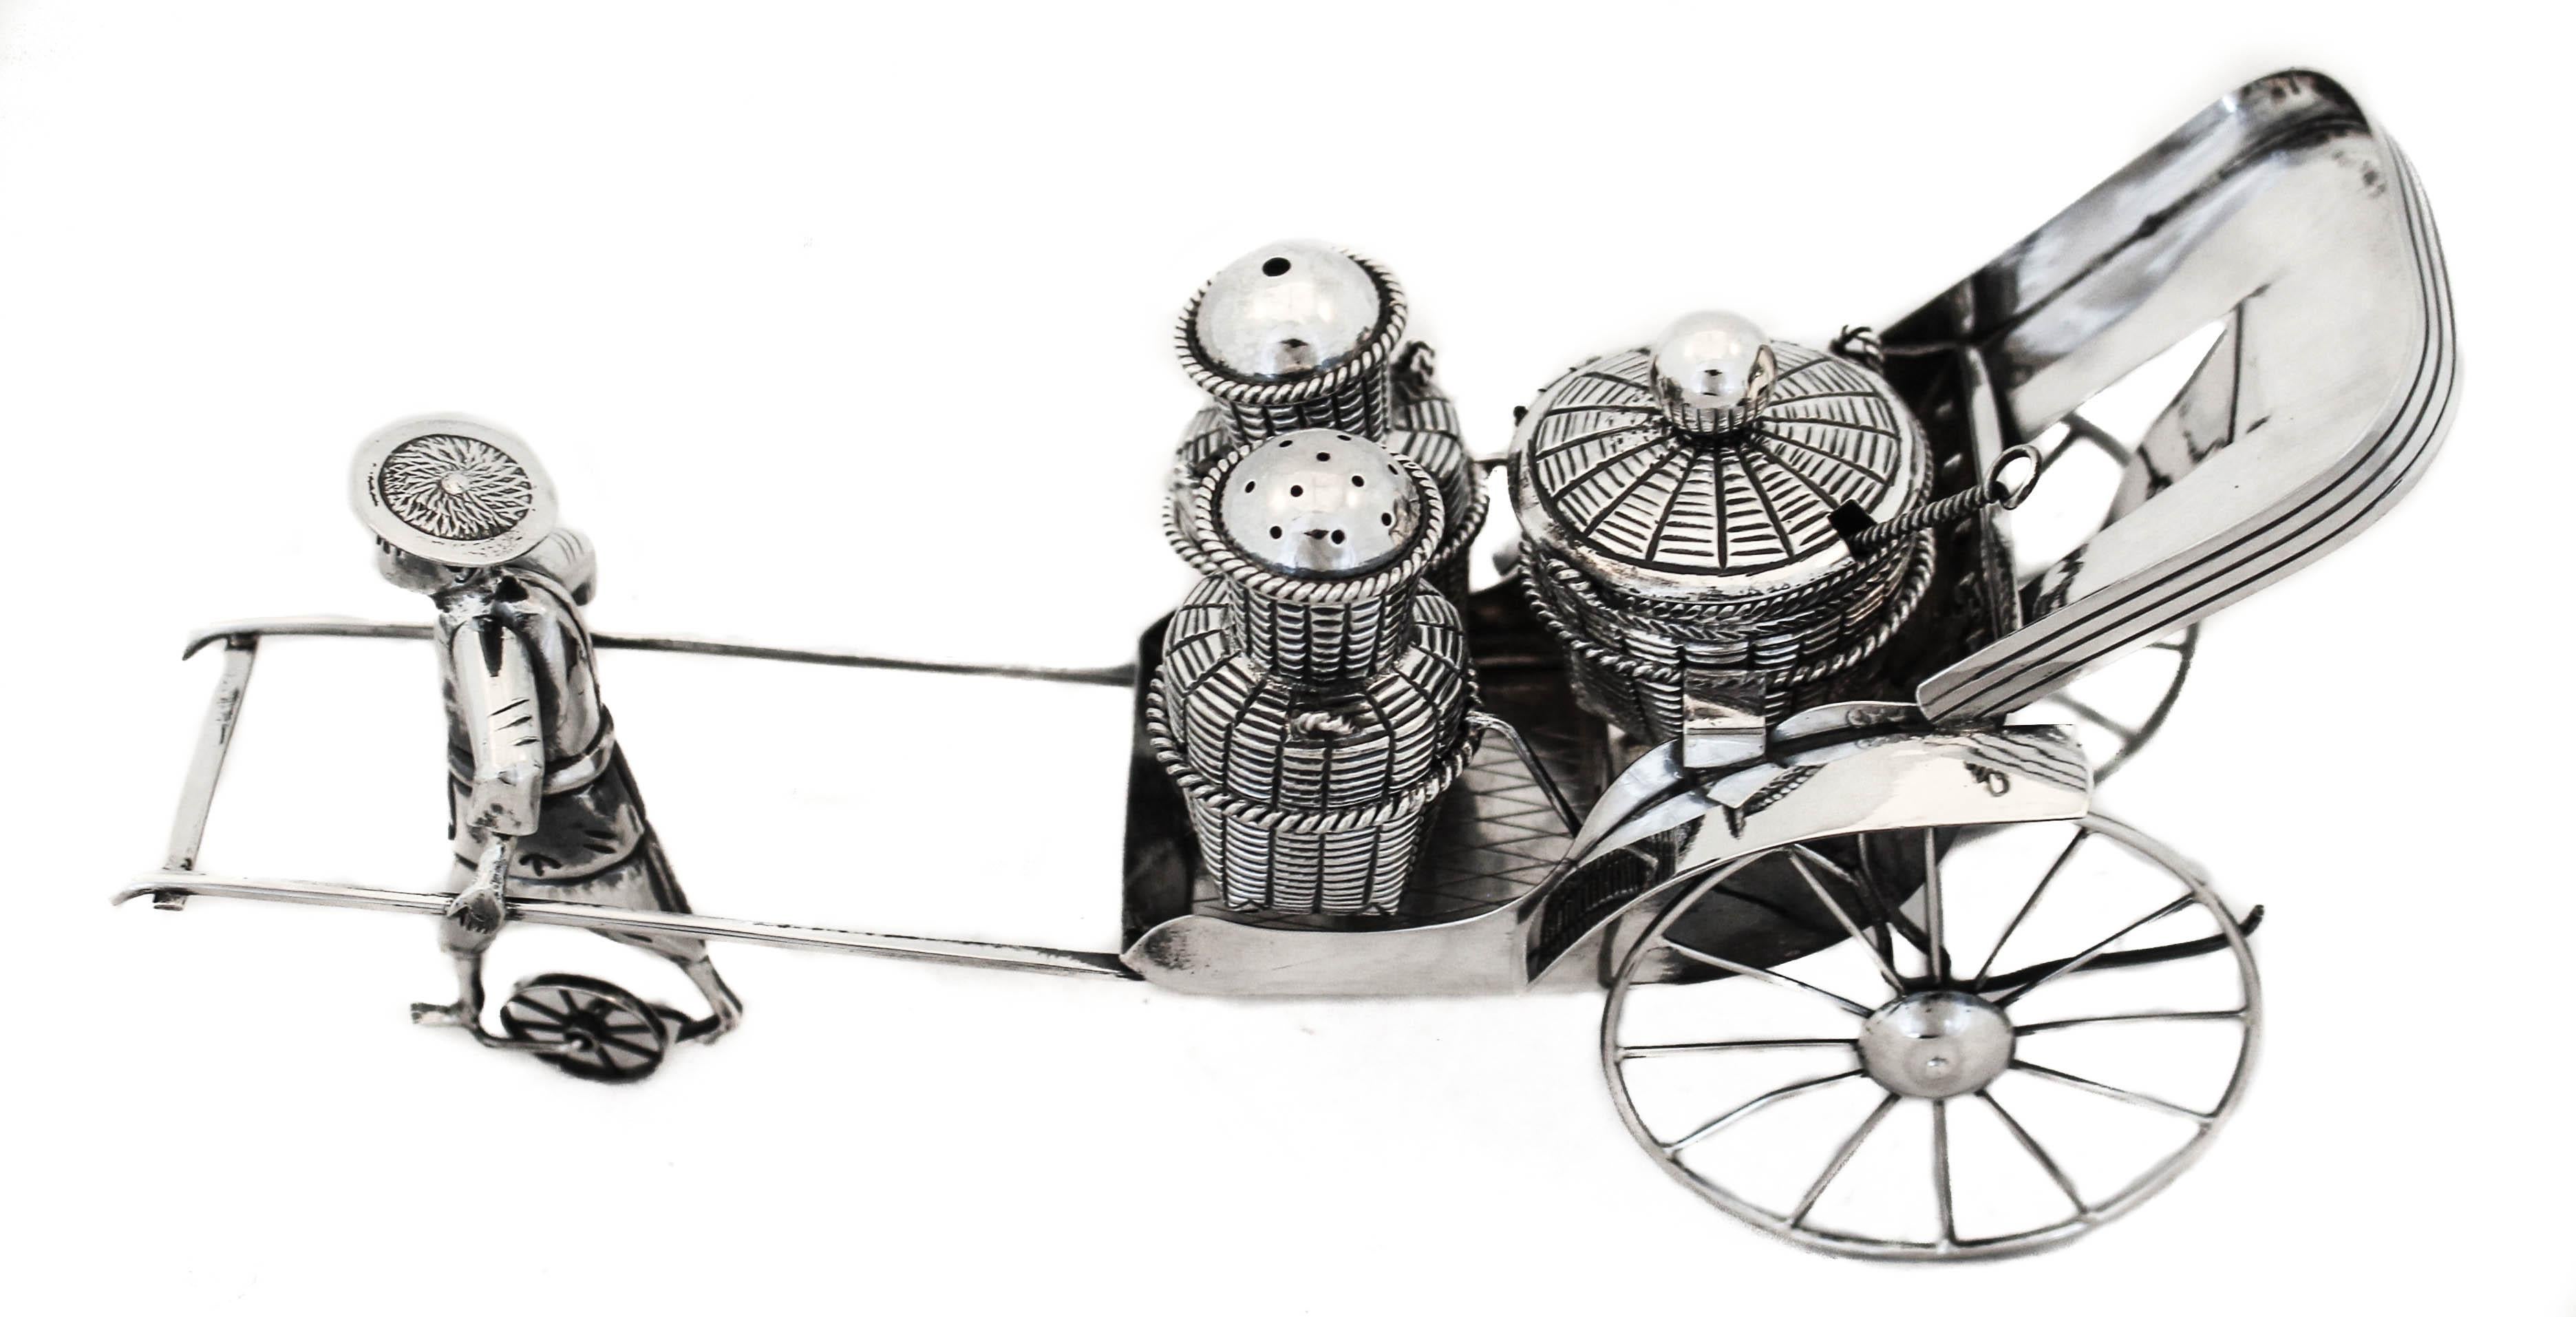 If you like the rare, unusual, whimsical continue reading…
We are happy to offer you this sterling silver antique Chinese salt & pepper shaker centerpiece designed as a man pulling a rickshaw. Manufactured by the Wang Hing Company of Hong Kong. The